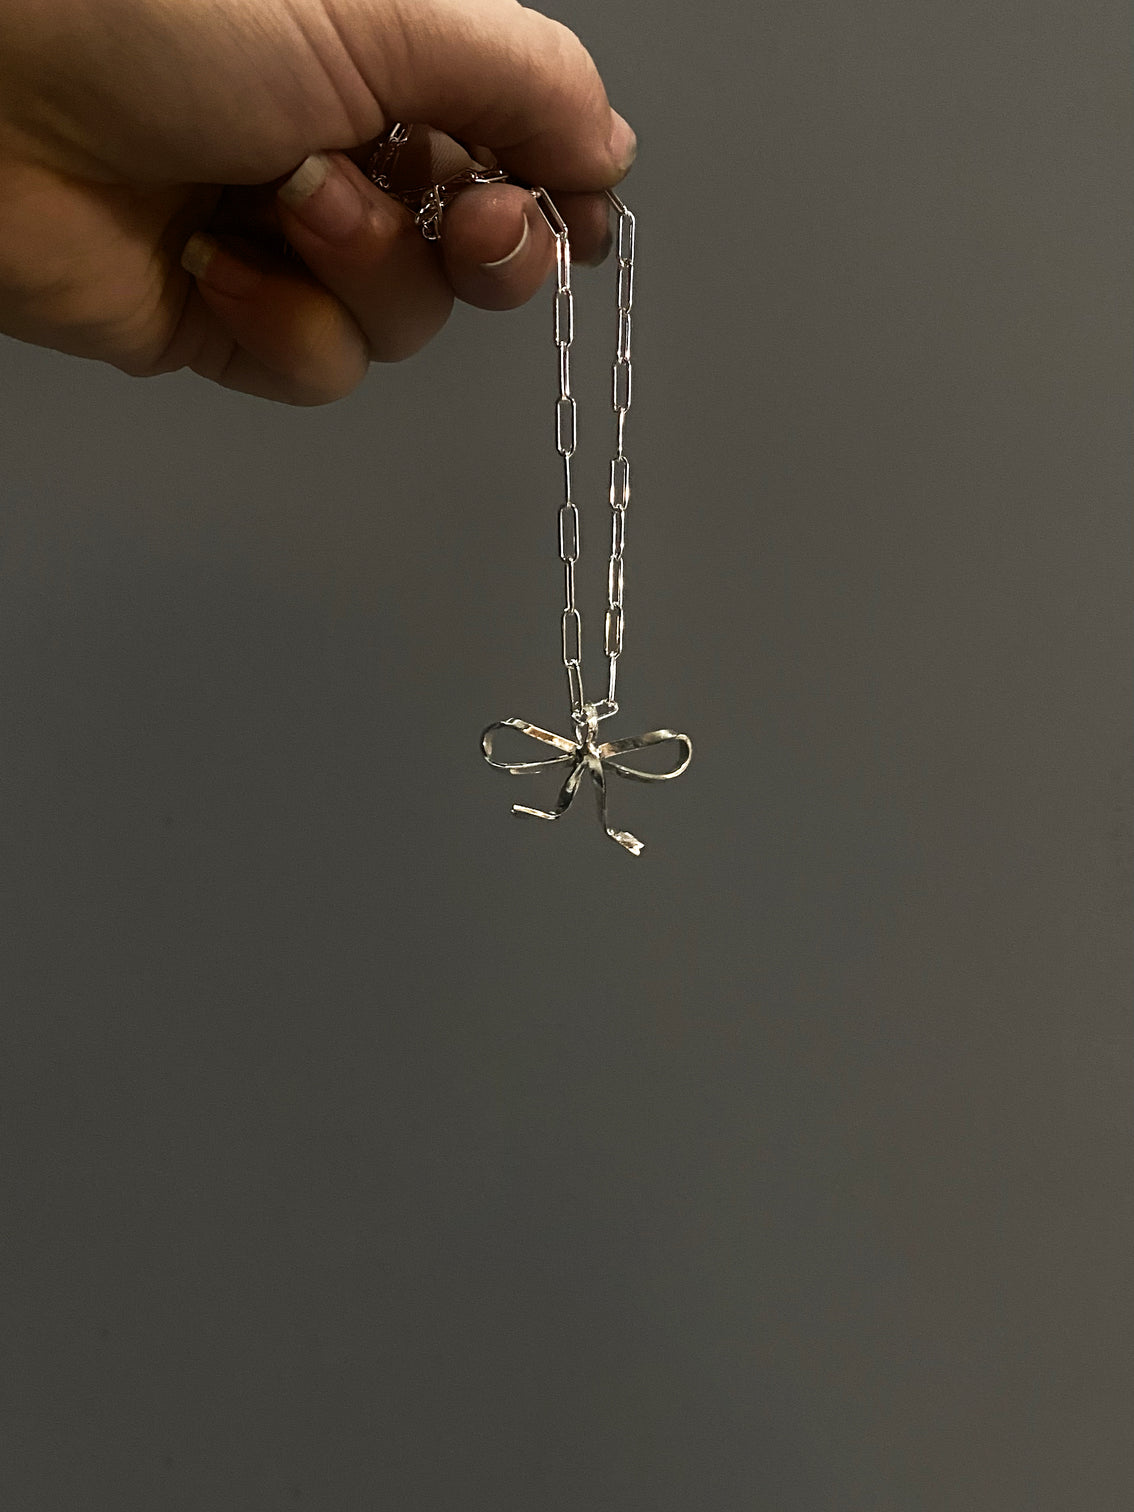 Medium silver bow pendant on chain with large oval links in hand